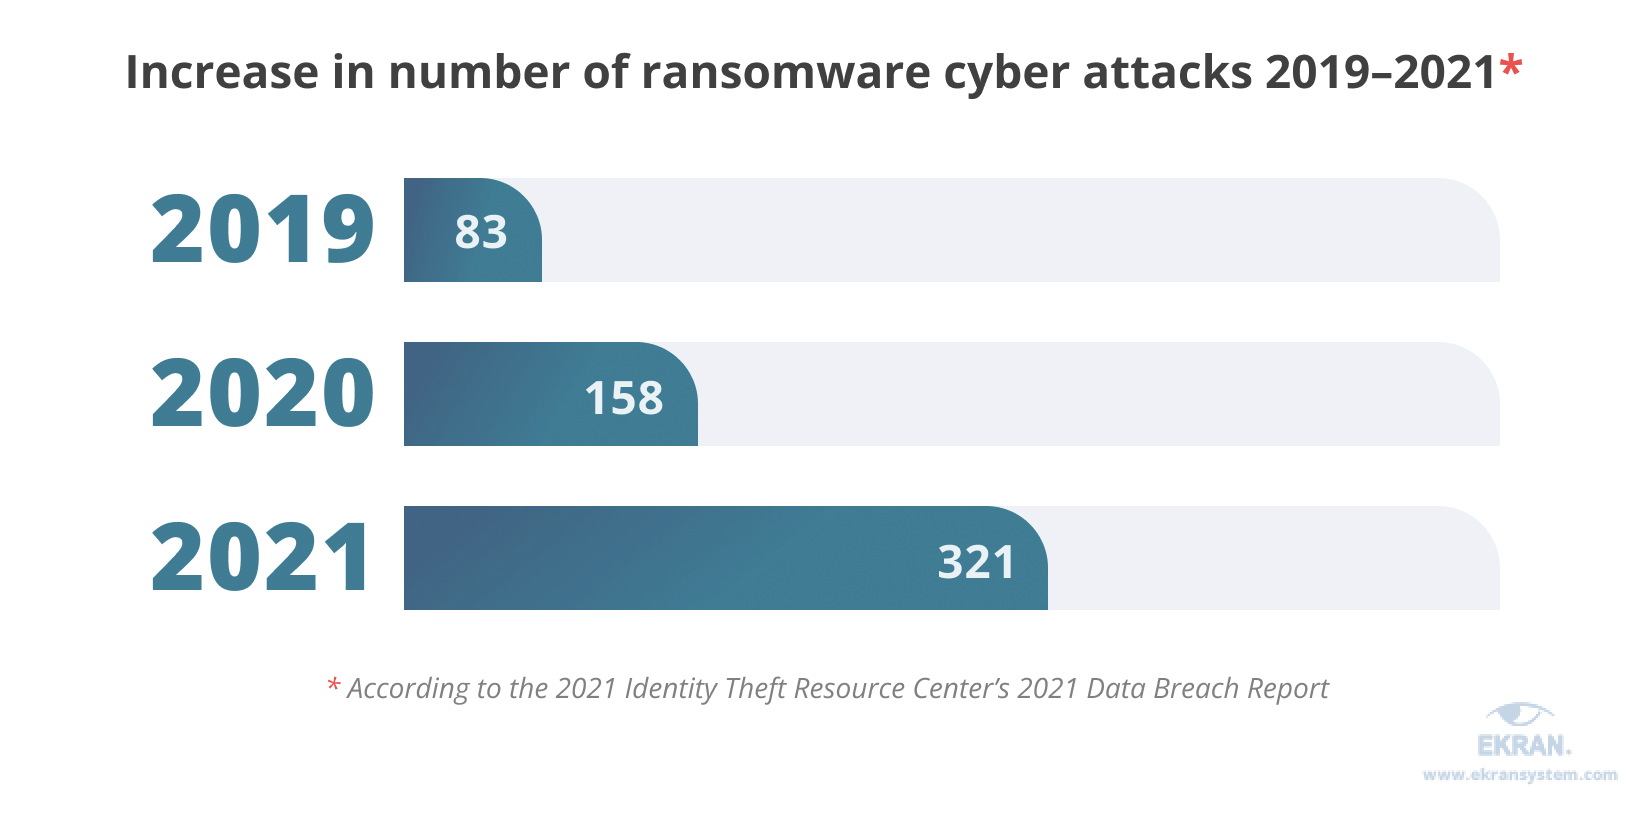 Increase in number of ransomware cyber attacks 2019-2021